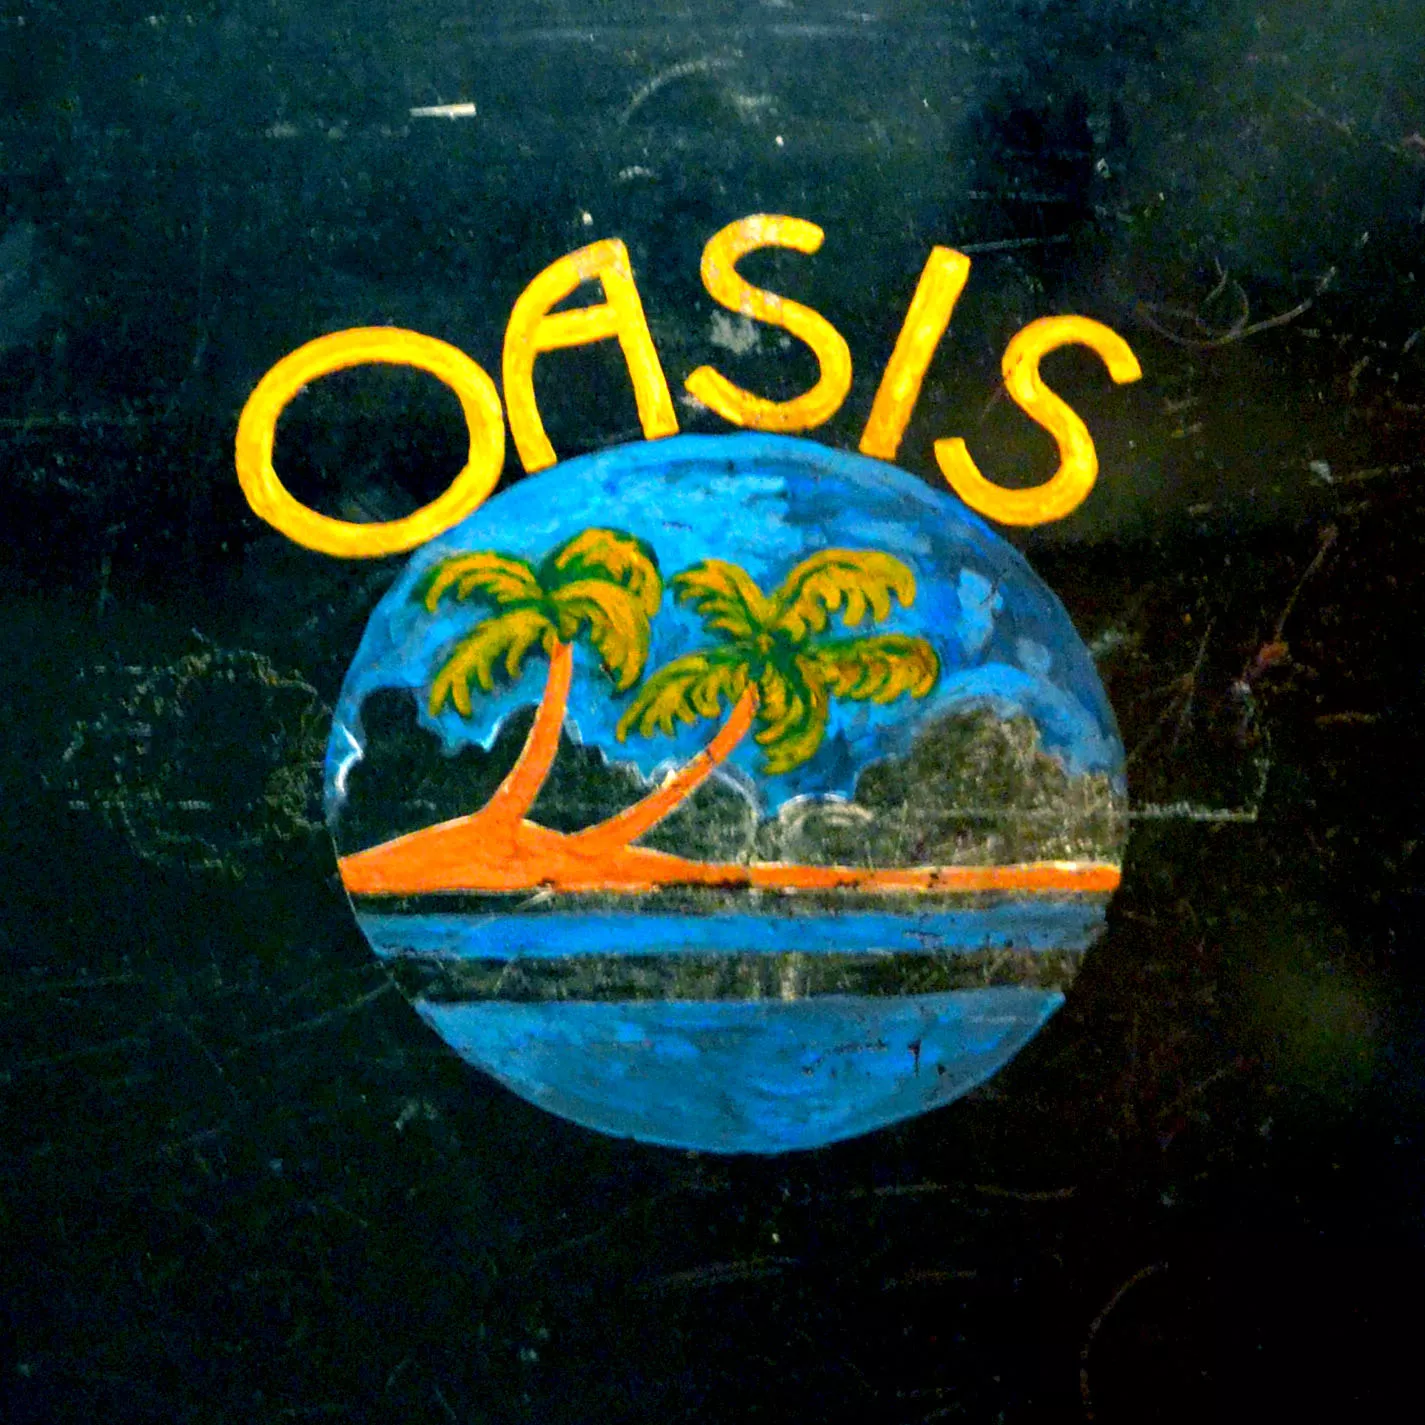 Oasis Door. (Photo by Heather Branstetter, with thanks to Eva Truean and the Bordello Museum)